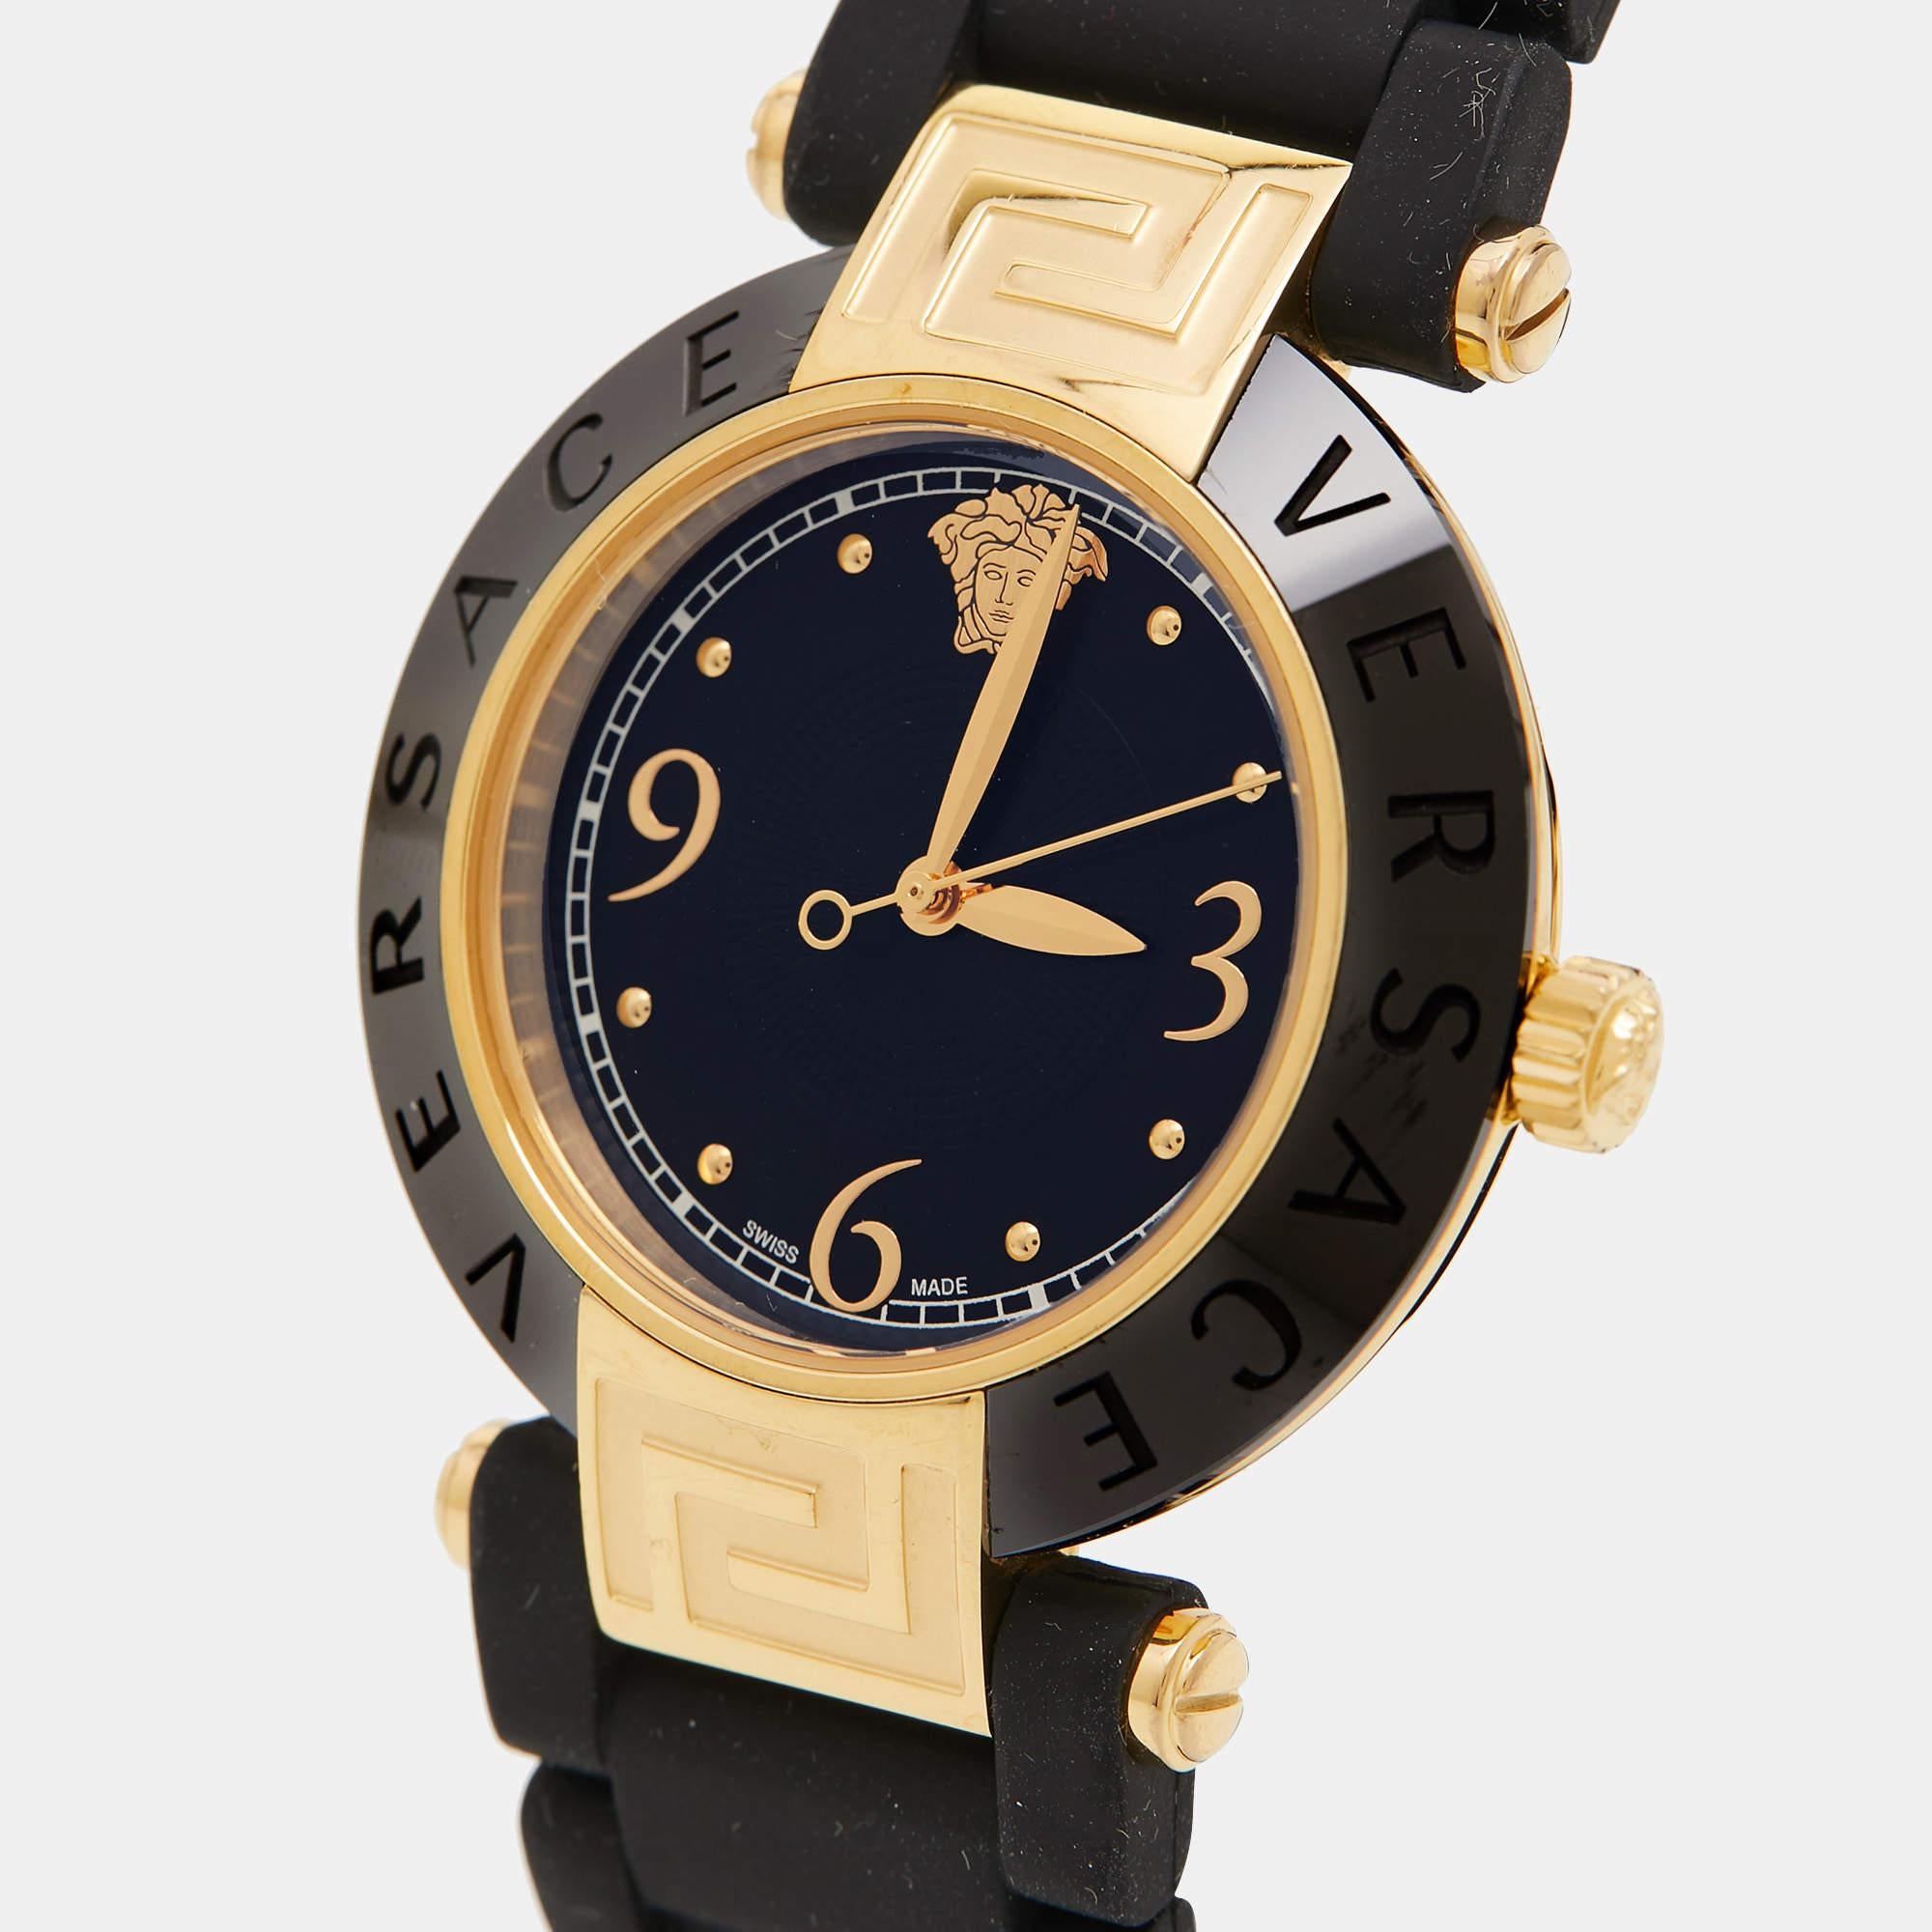 Let this fine designer wristwatch accompany you with ease and luxurious style. Beautifully crafted using the best quality materials, this authentic branded watch is built to be a standout accessory for your wrist.

